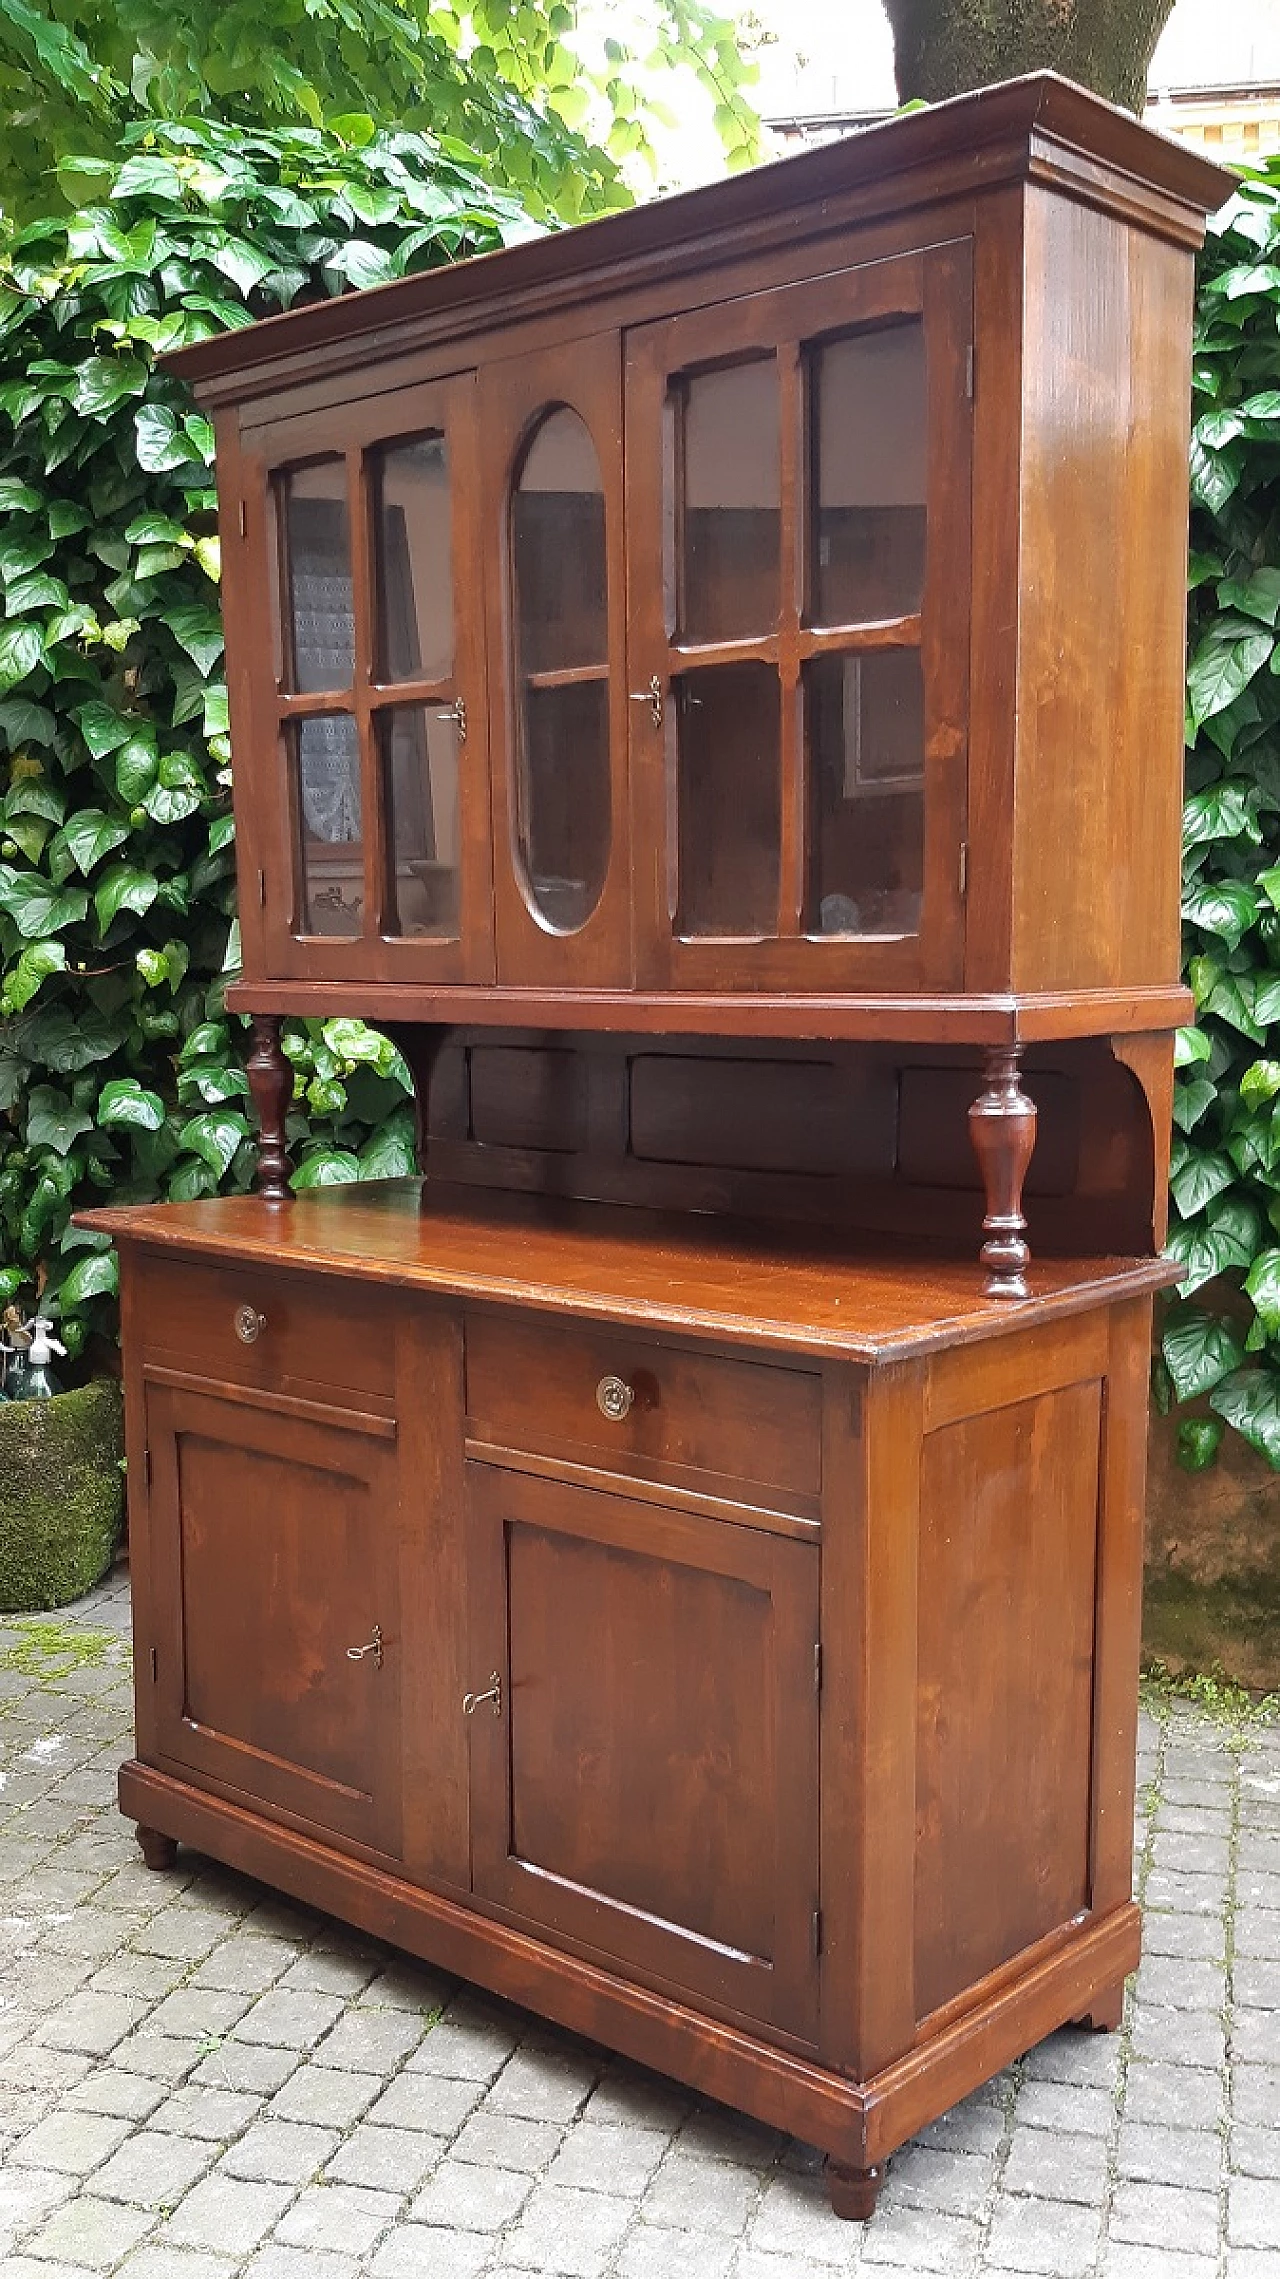 Two-body showcase in cherry wood, second half of the 19th century 2